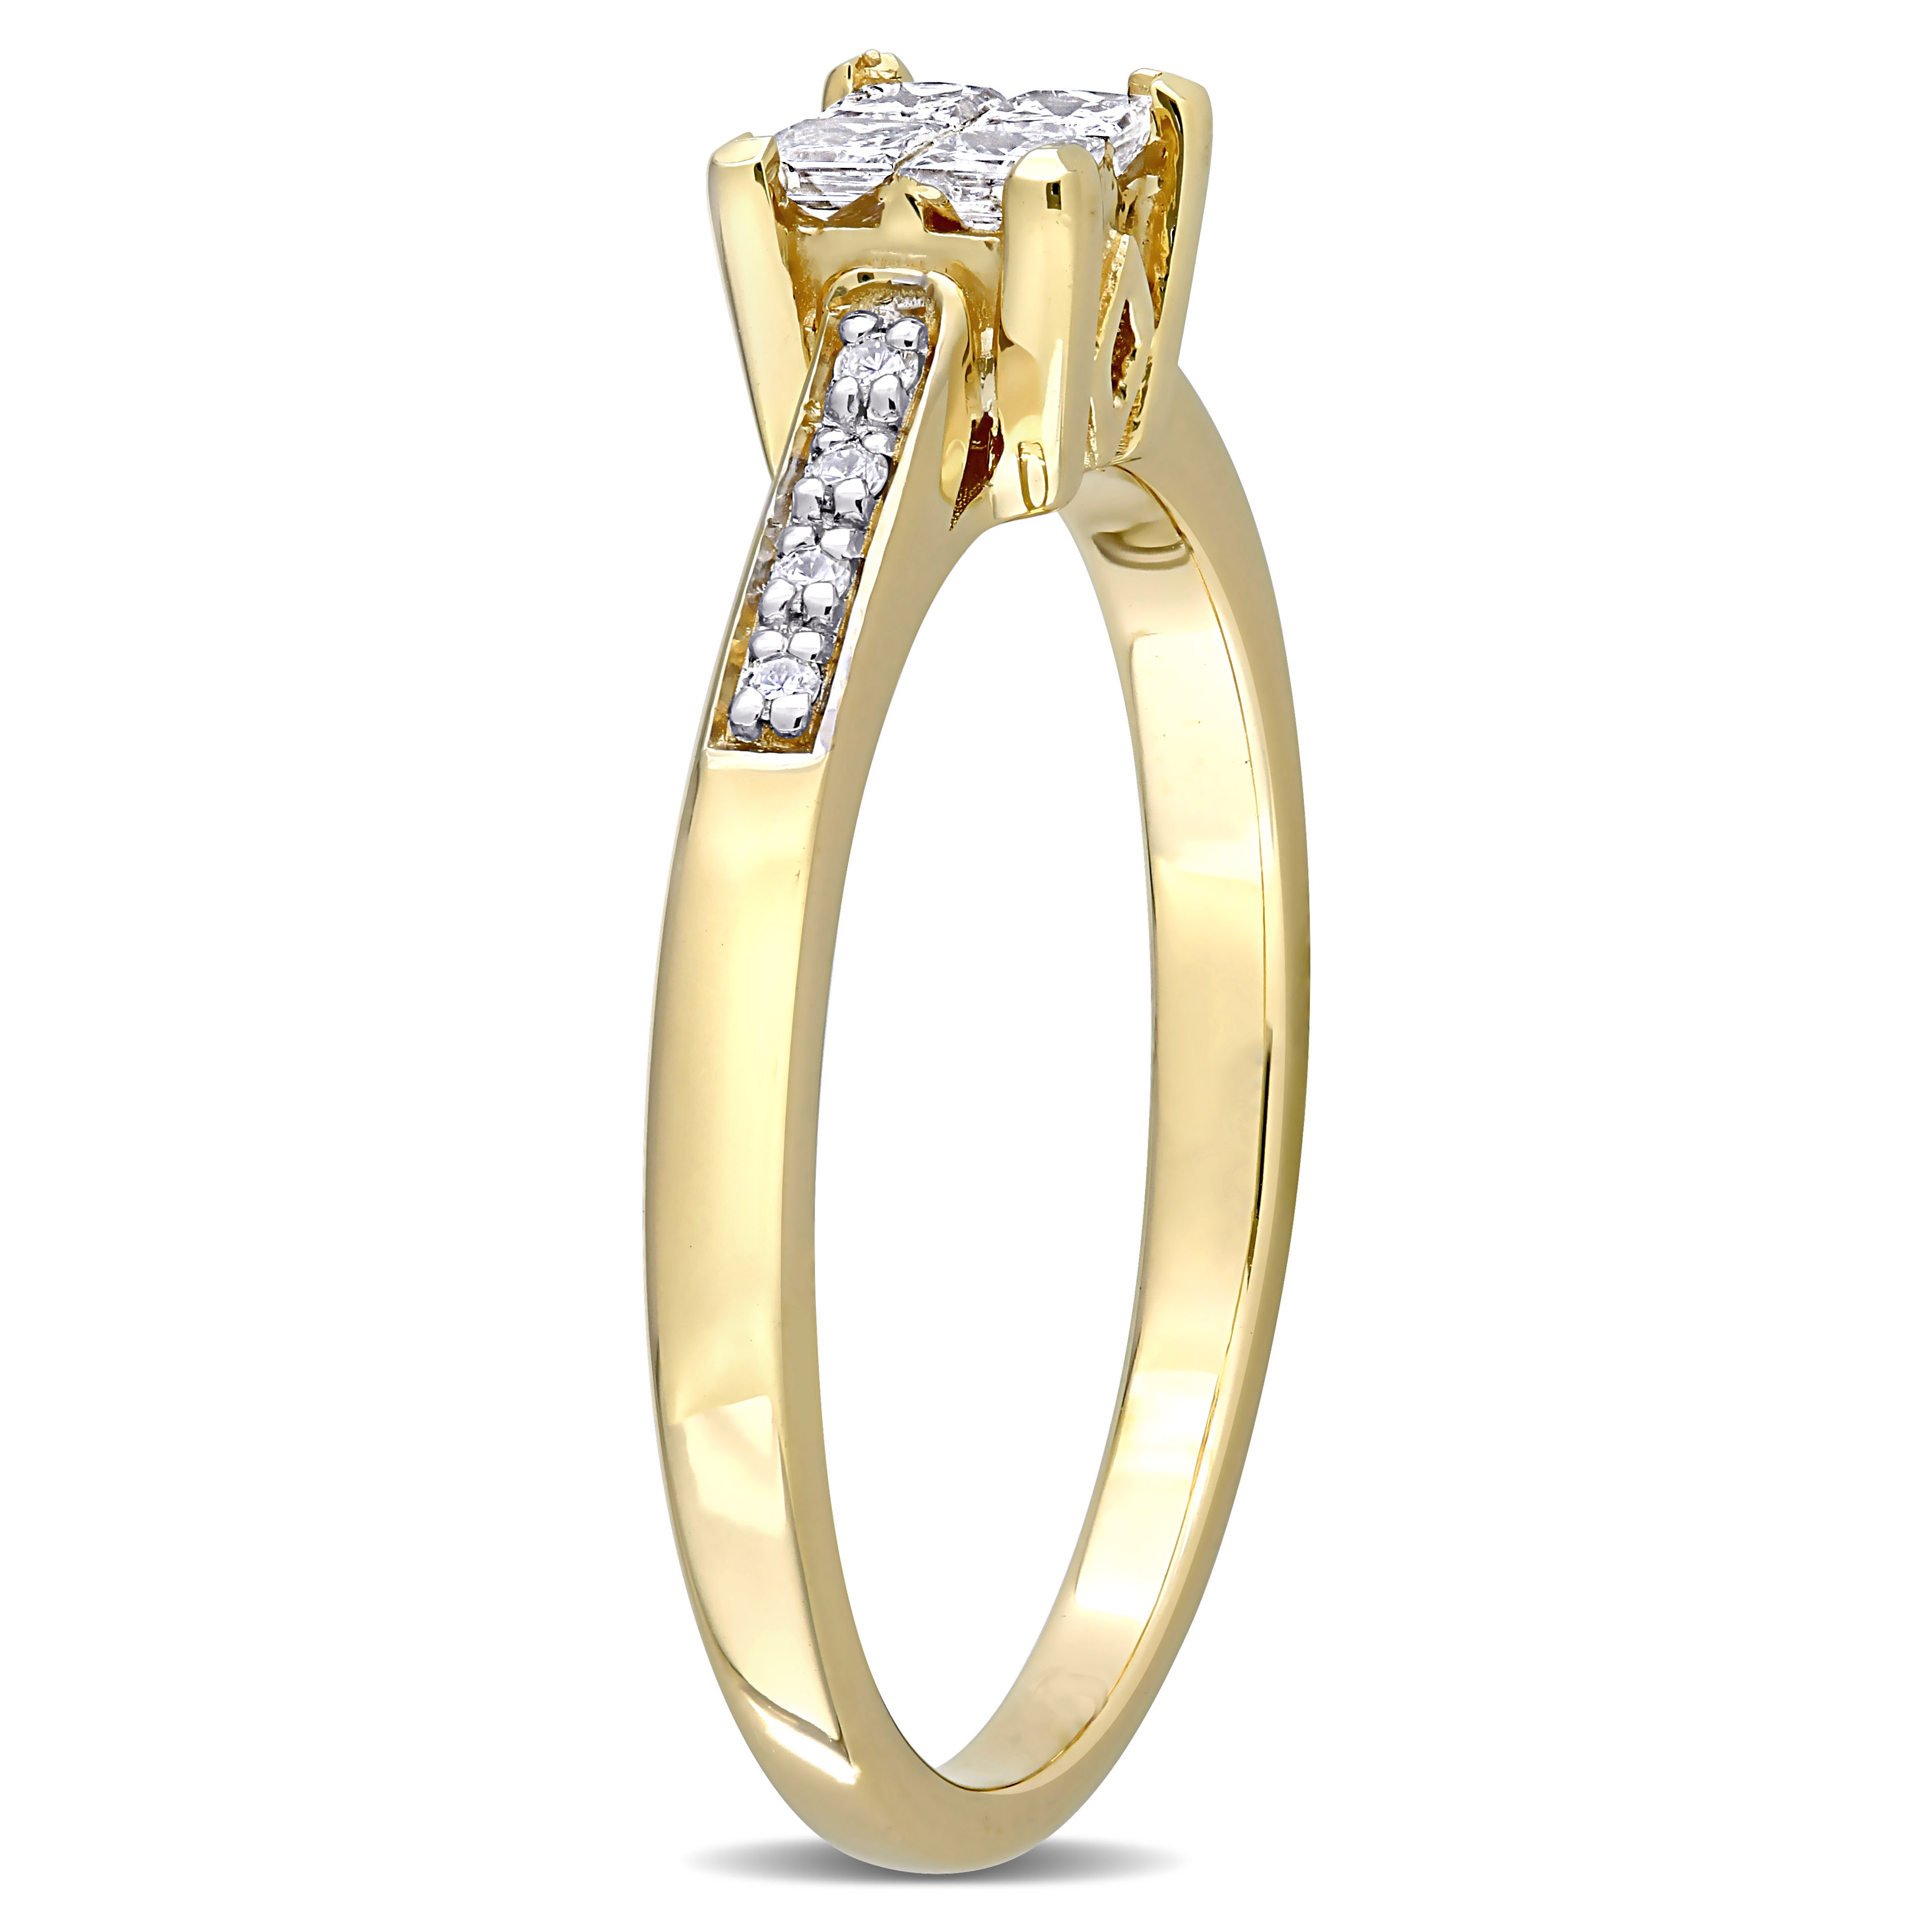 1/4 CT TW Princess Cut Quad and Round Diamond Engagement Ring in 10k Yellow Gold